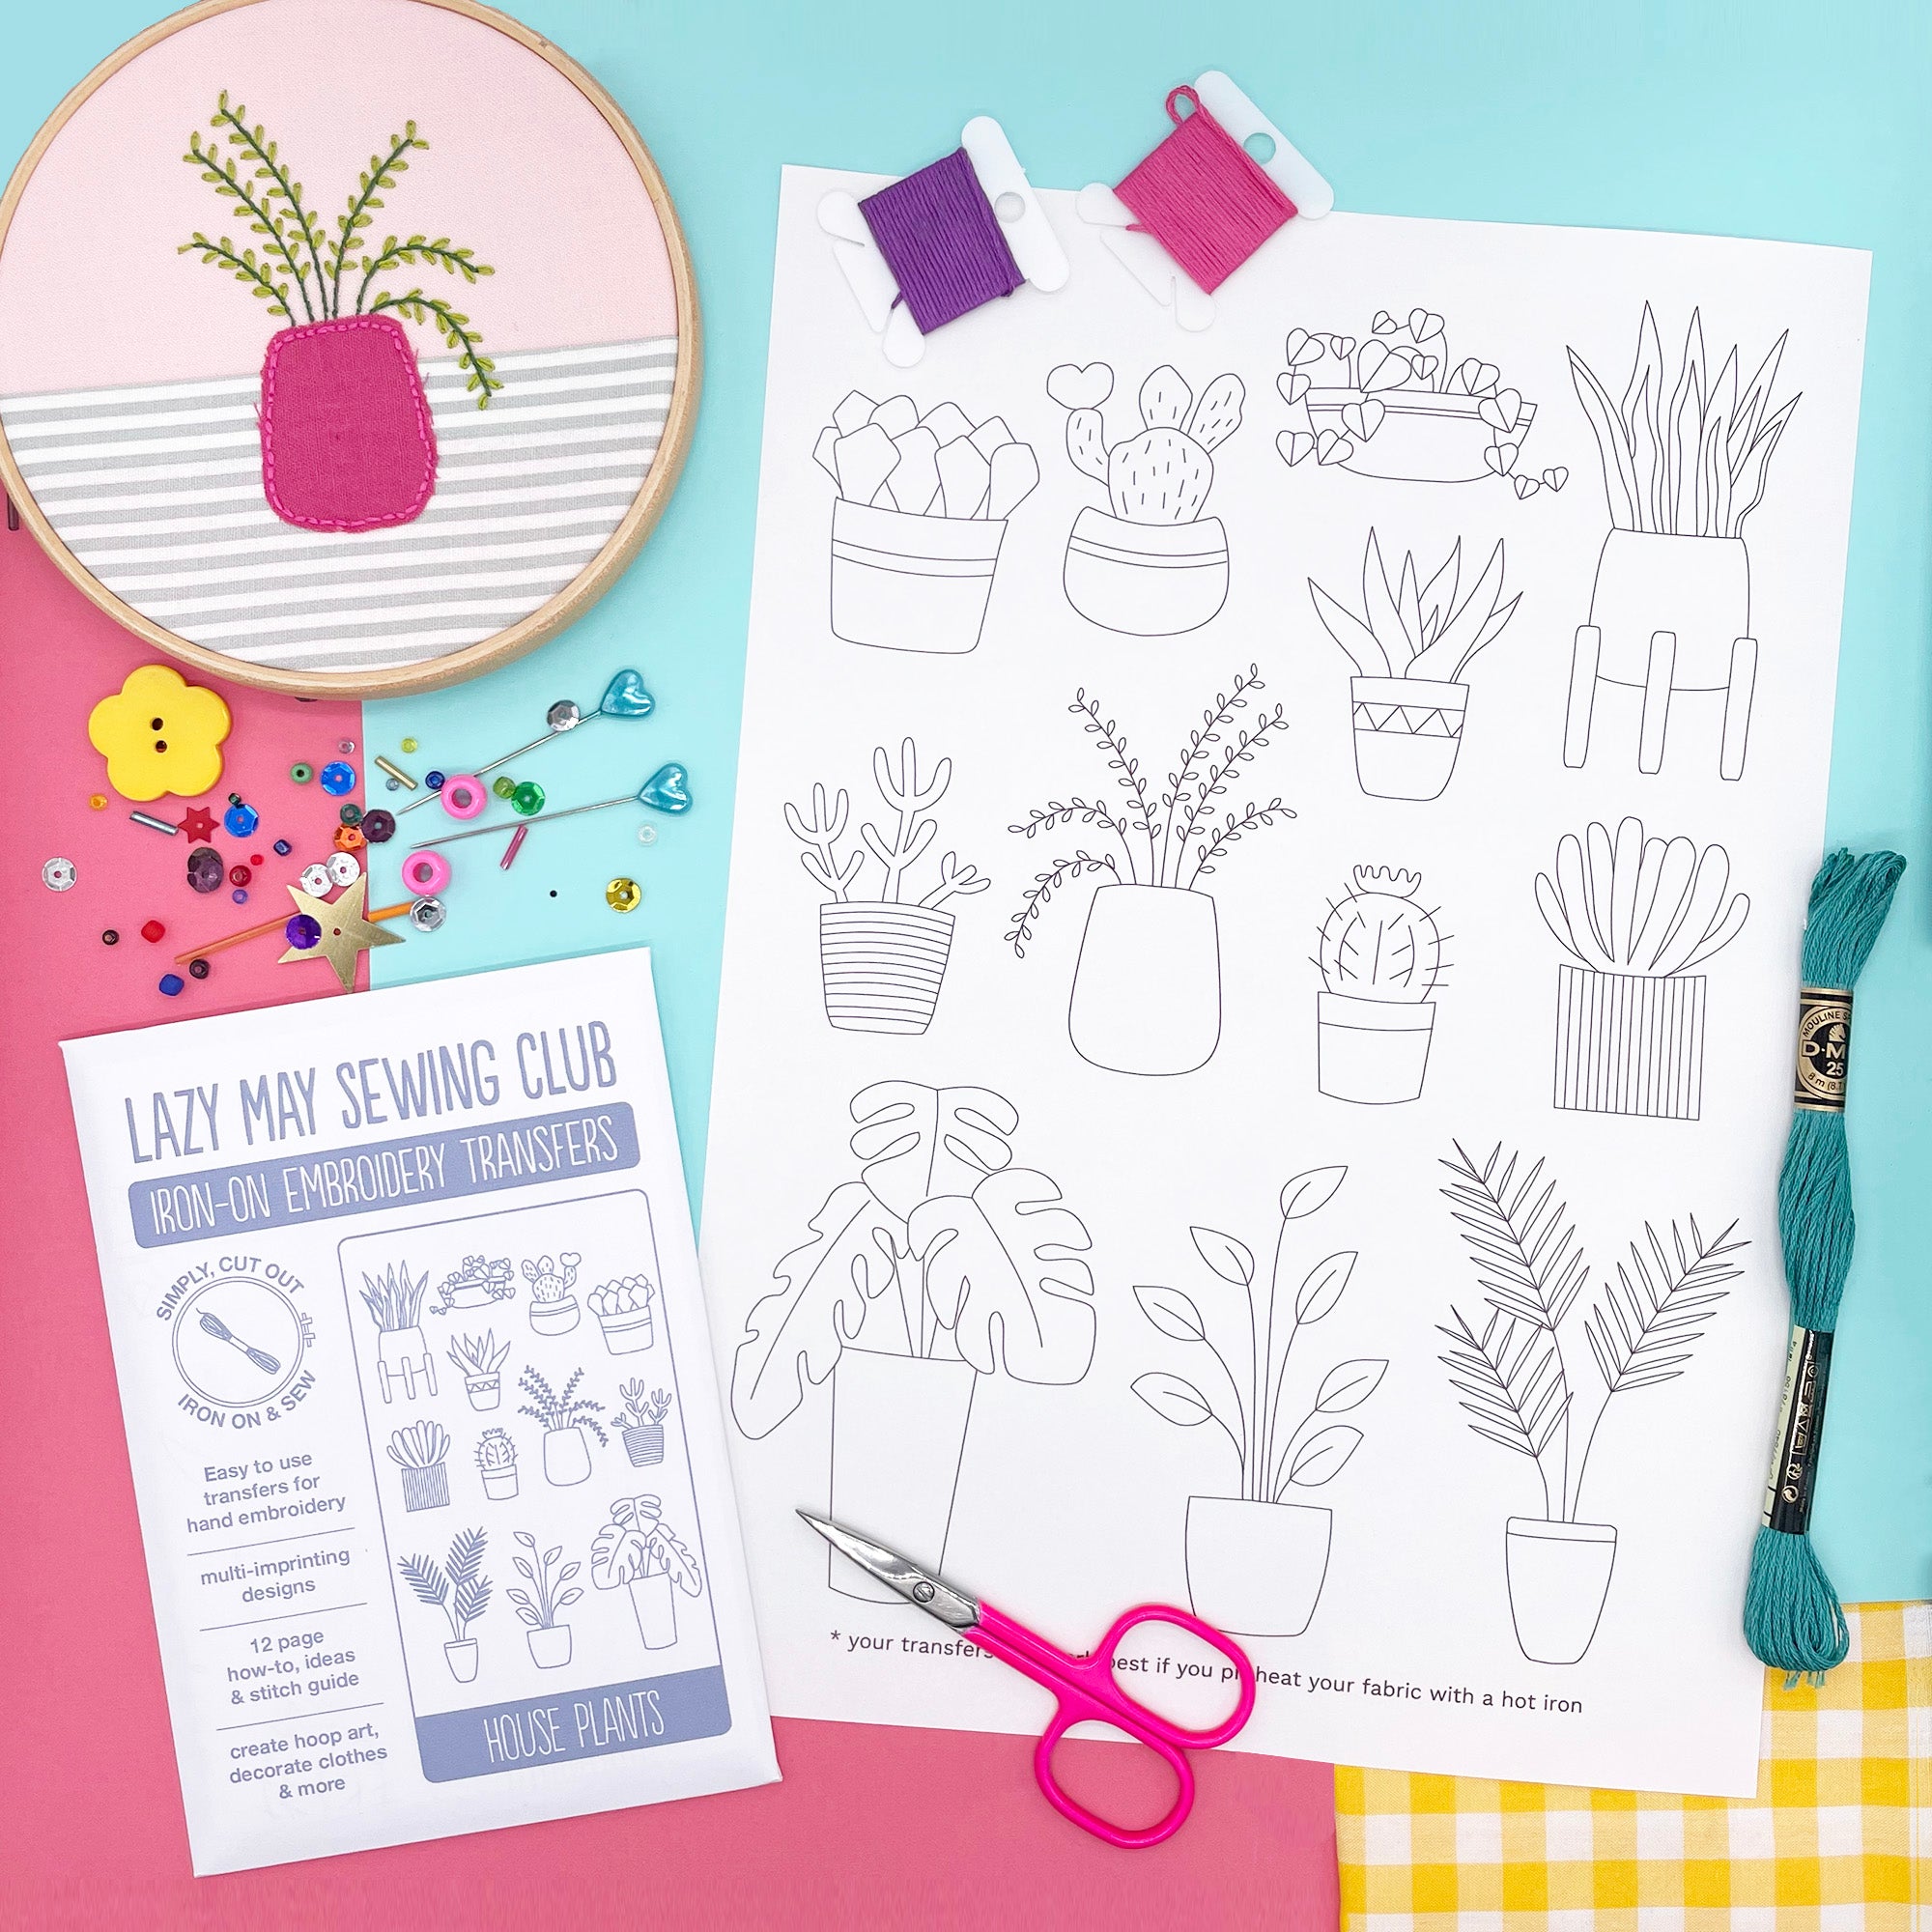 House Plants: Embroidery Patterns (iron-on transfers) – Lazy May Sewing Club